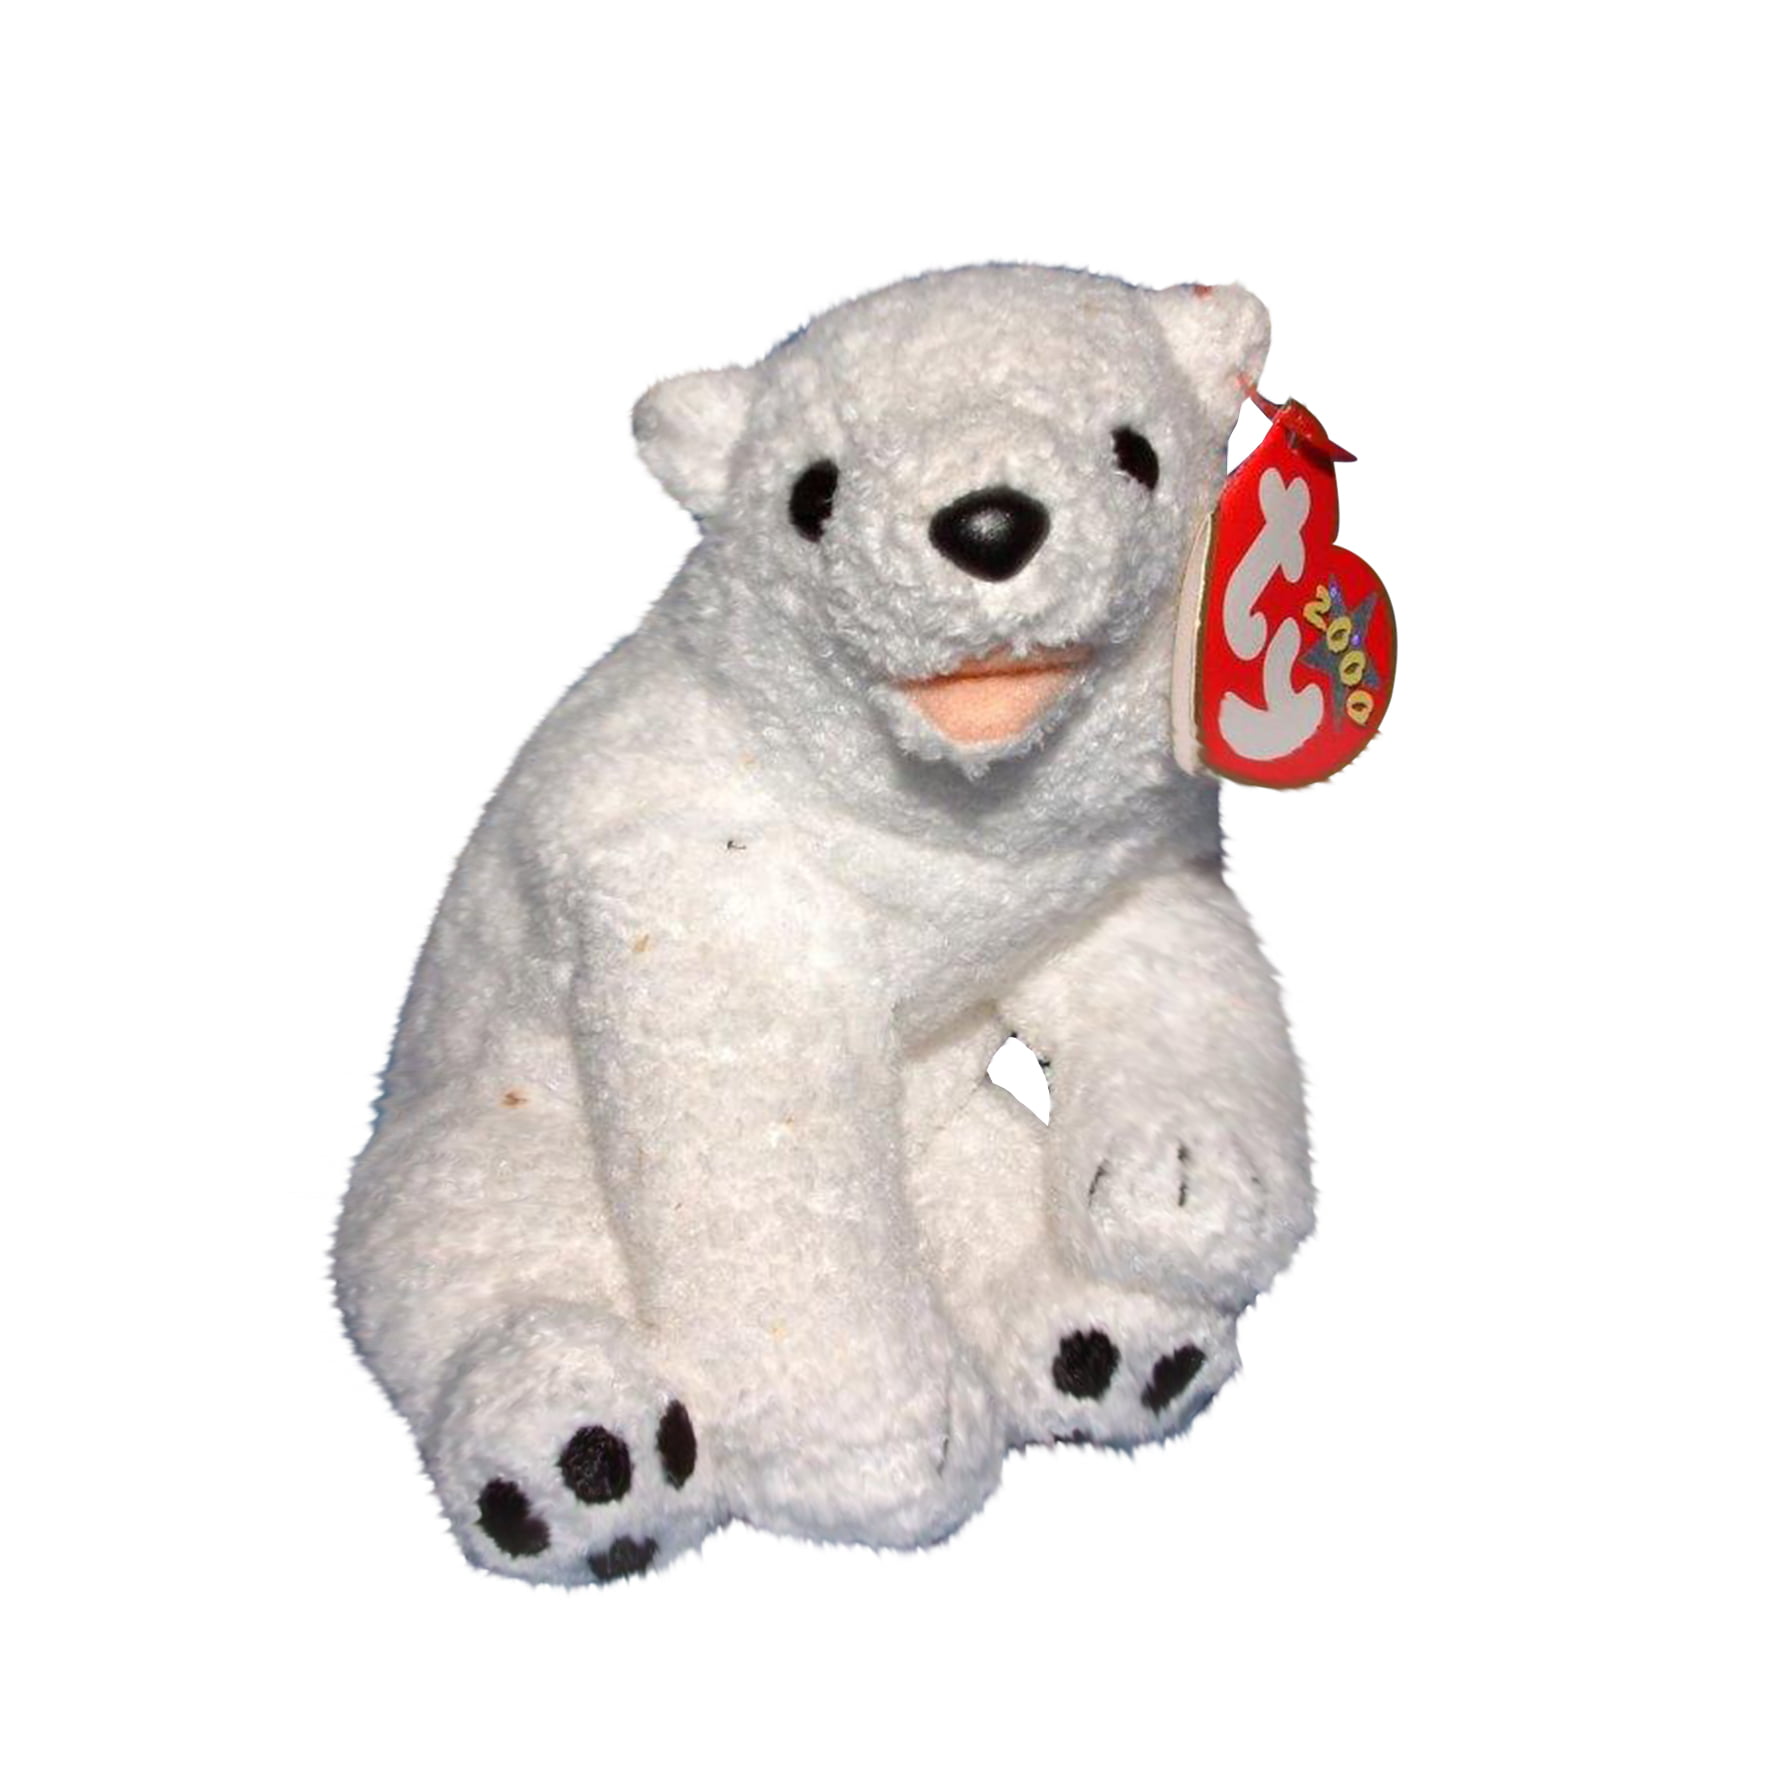 Details about   Ty Beanie Baby Aurora the Polar Bear RETIRED *Mint* 